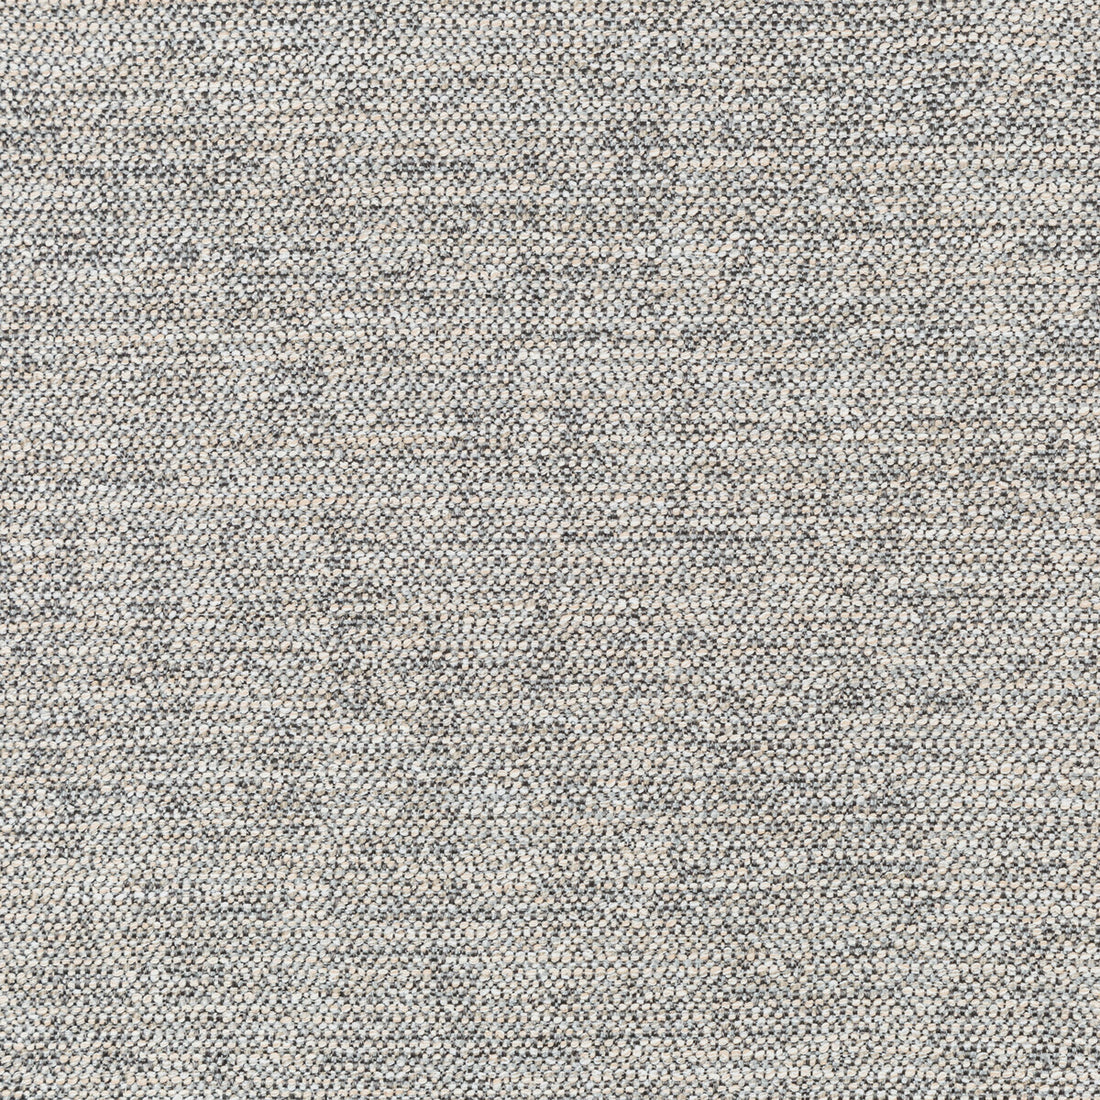 Tide Over fabric in charcoal color - pattern 35922.21.0 - by Kravet Couture in the Vista collection